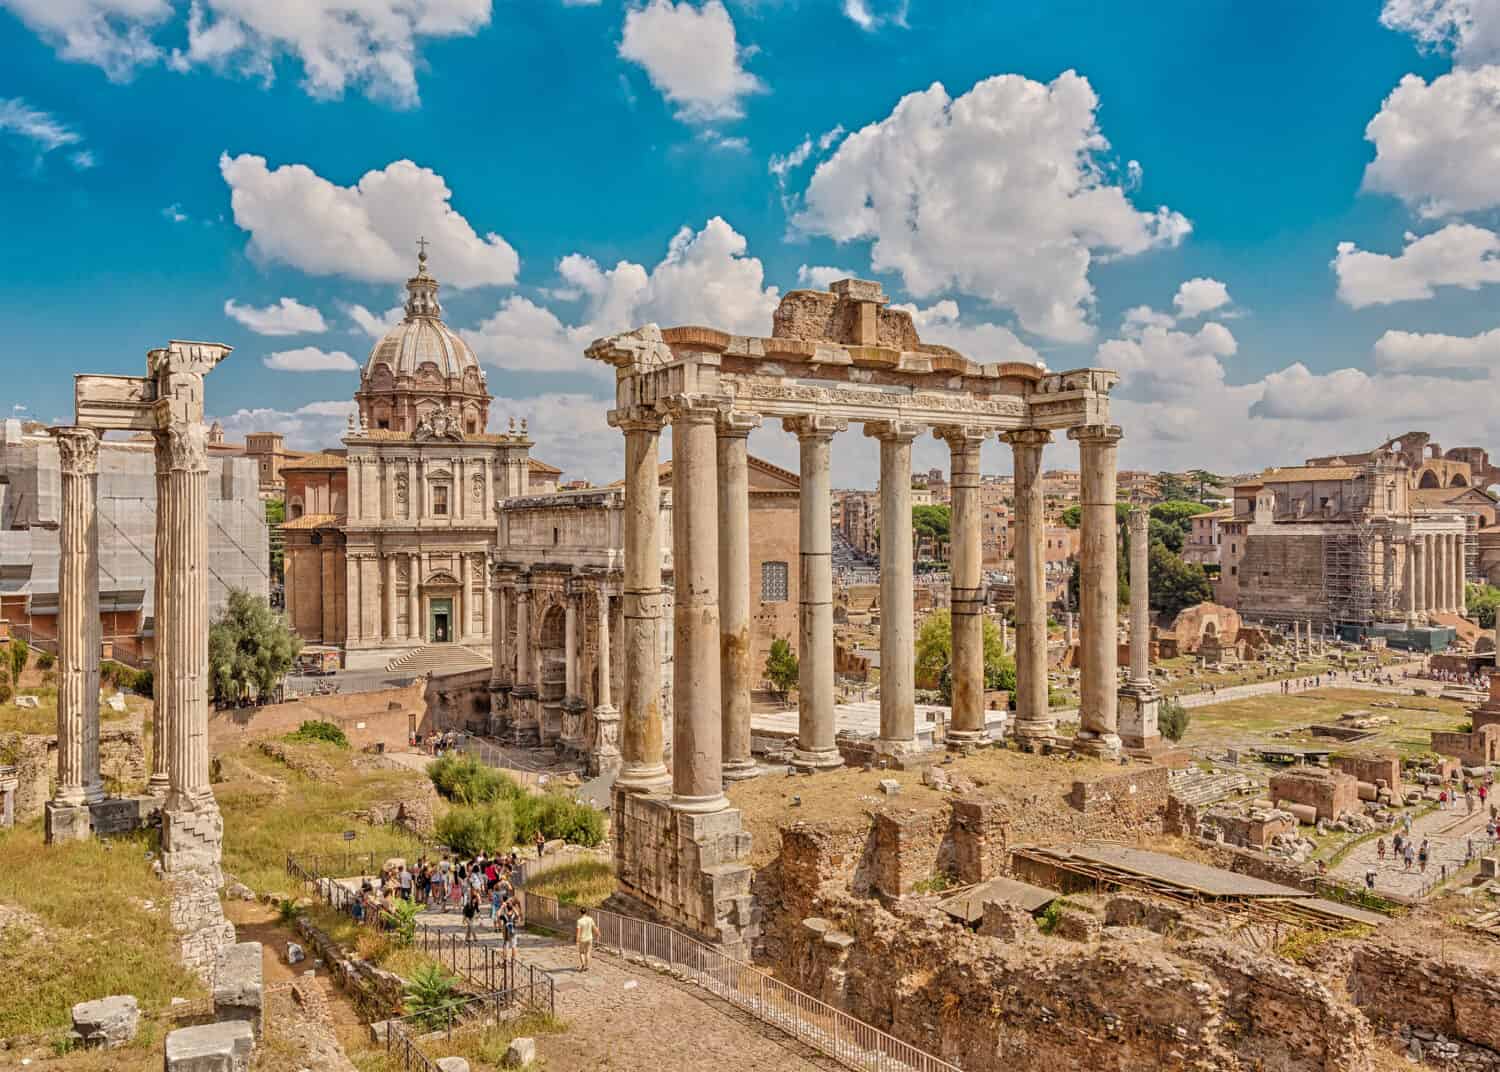 Roman Forum, in the center - the columns of the Temple of Saturn, followed by the Arch of Septimius Severus. Rome. Italy. 